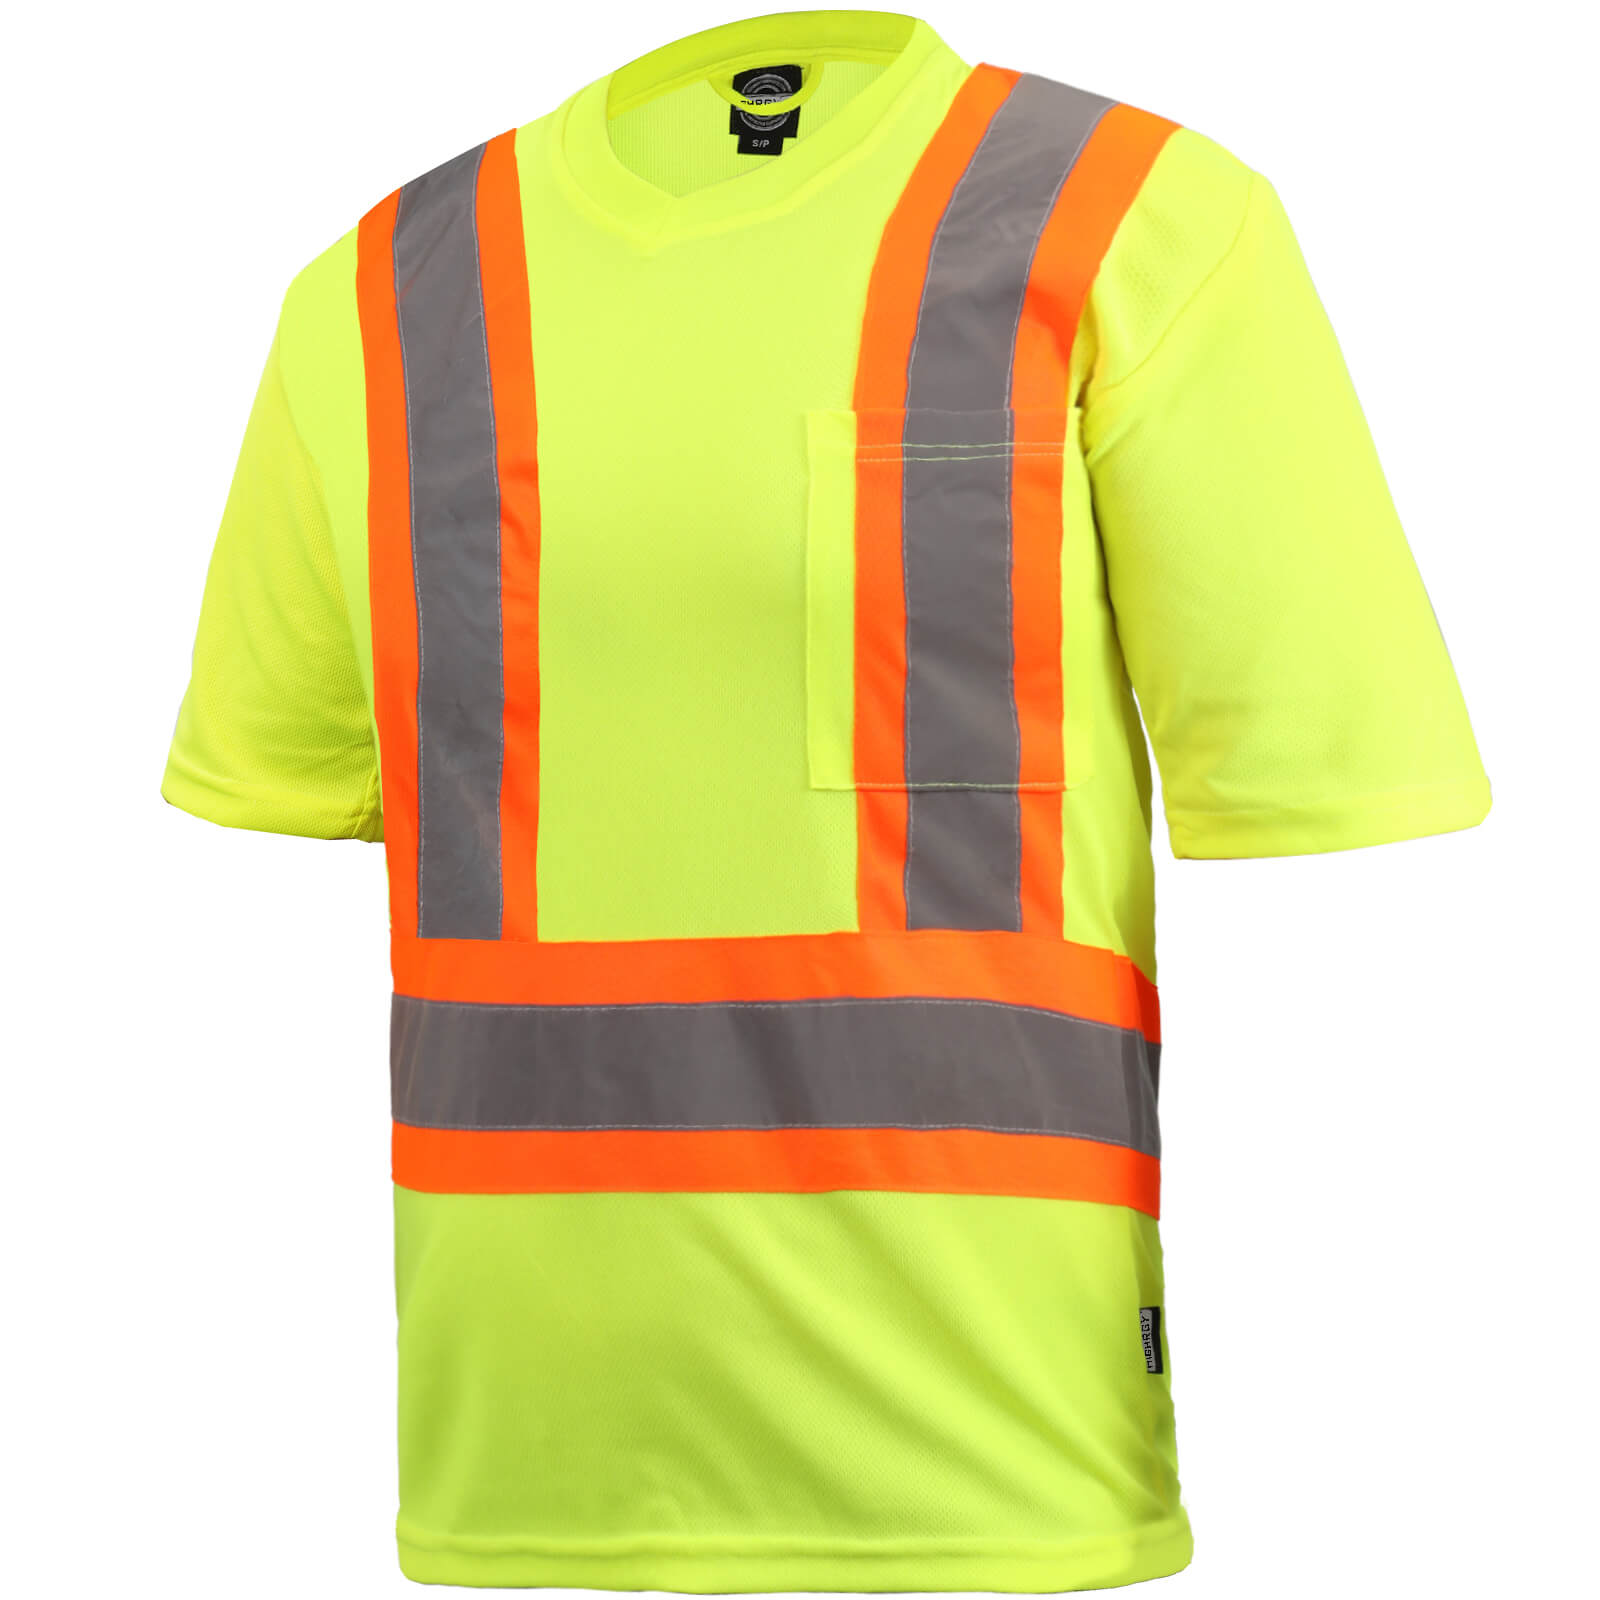 HIGH VISIBILITY SAFETY CLOTHING T-SHIRT YELLOW - Protective Equipment ...